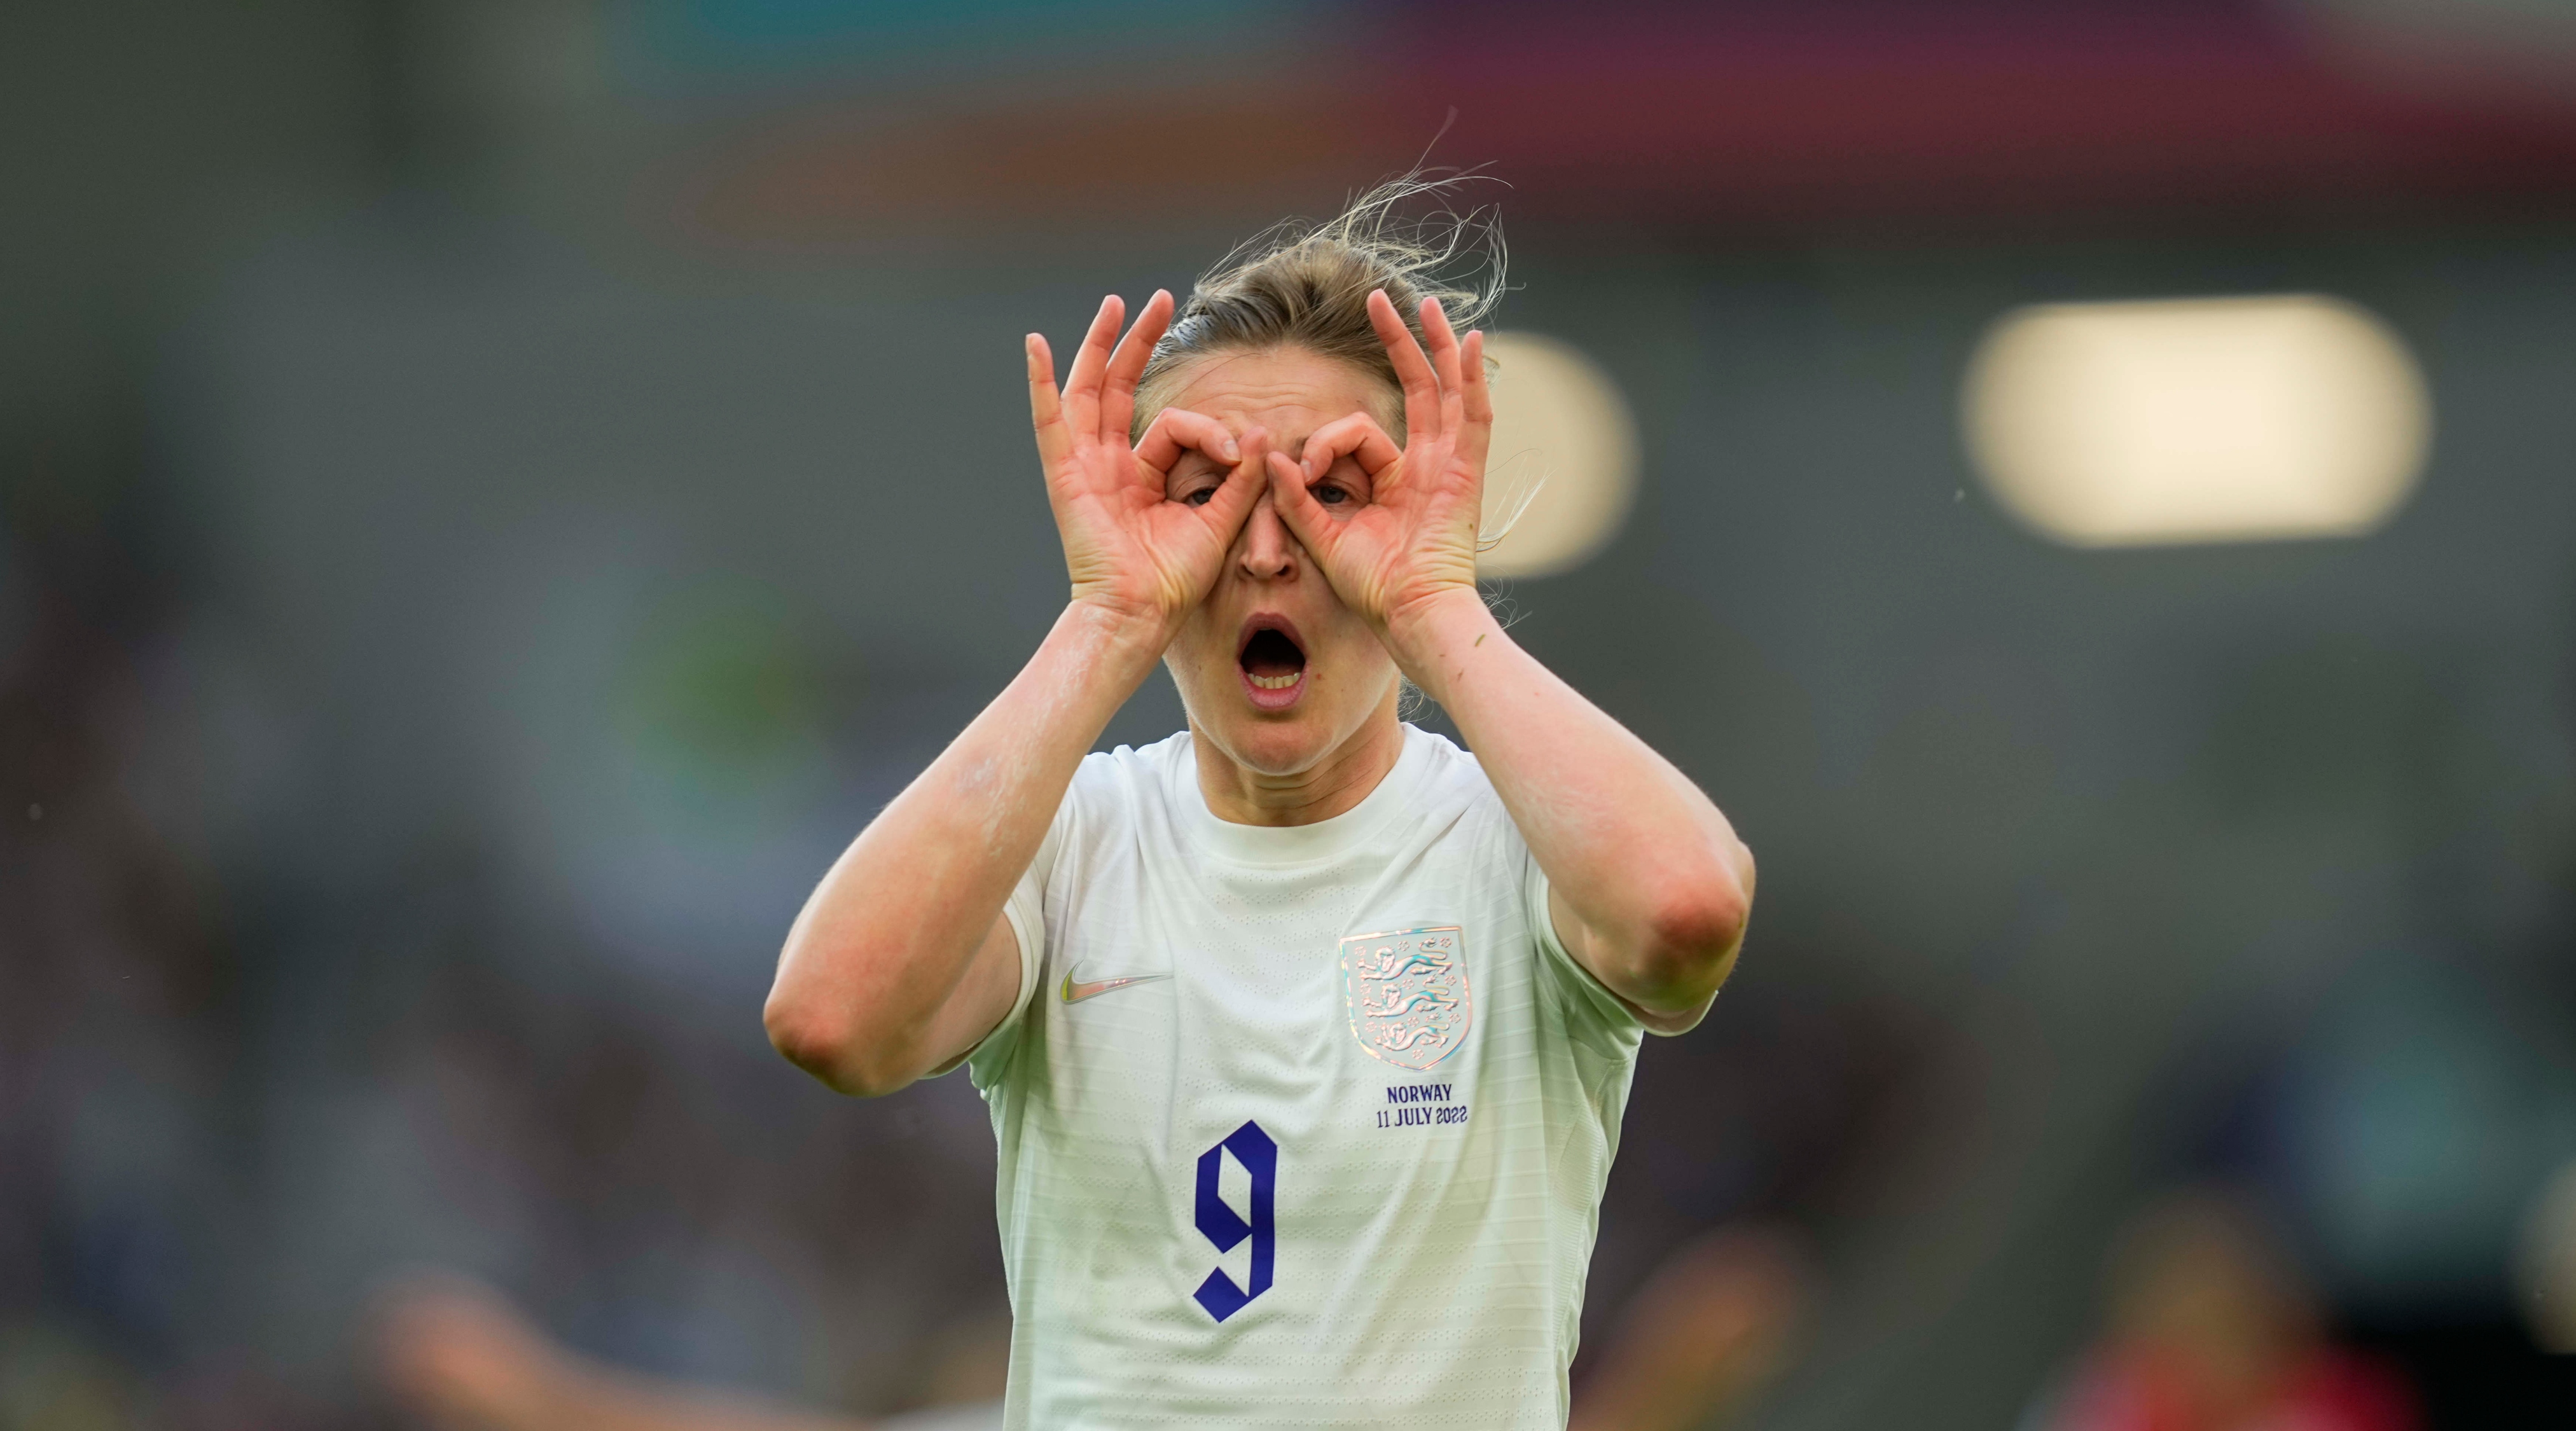 BRIGHTON, ENGLAND - JULY 11: Ellen White of England celebrates scoring her teams third goal during the UEFA Women's Euro England 2022 group A match between England and Norway at Brighton & Hove Community Stadium on July 11, 2022 in Brighton, United Kingdom.